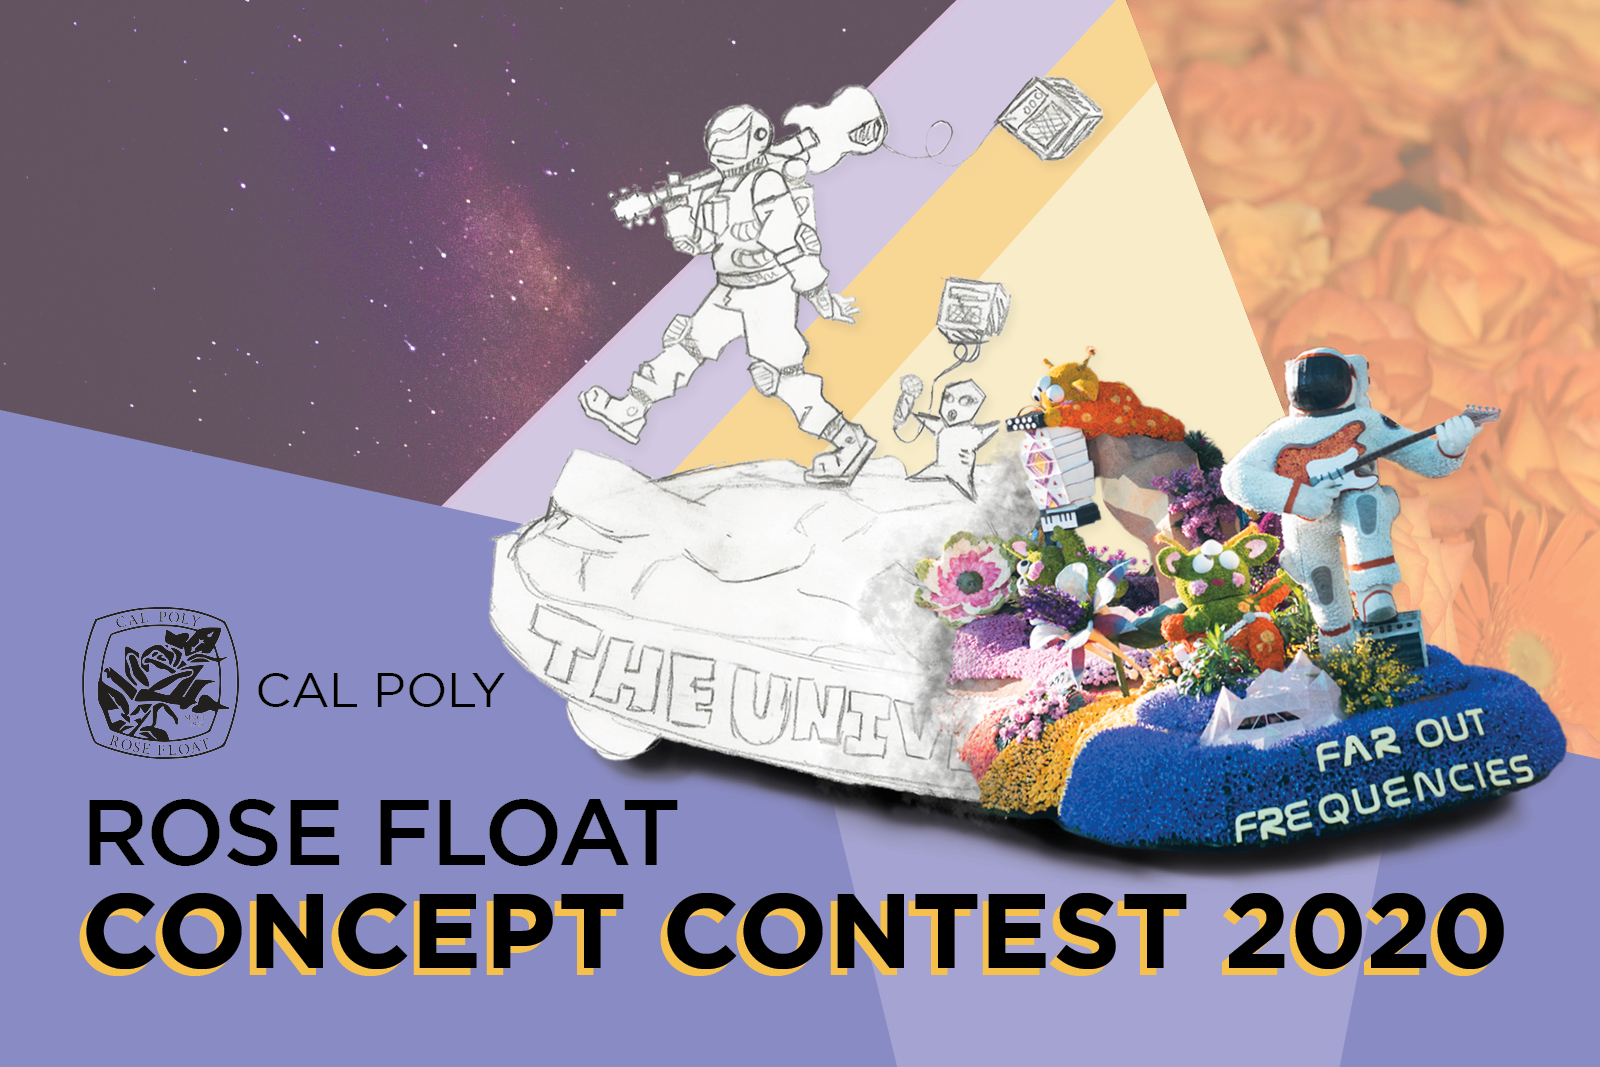 Cal Poly Rose Float Concept Contest 2020, Sketch of last year's winning design of an astronaut with a guitar and aliens singing combined with the final float design called 